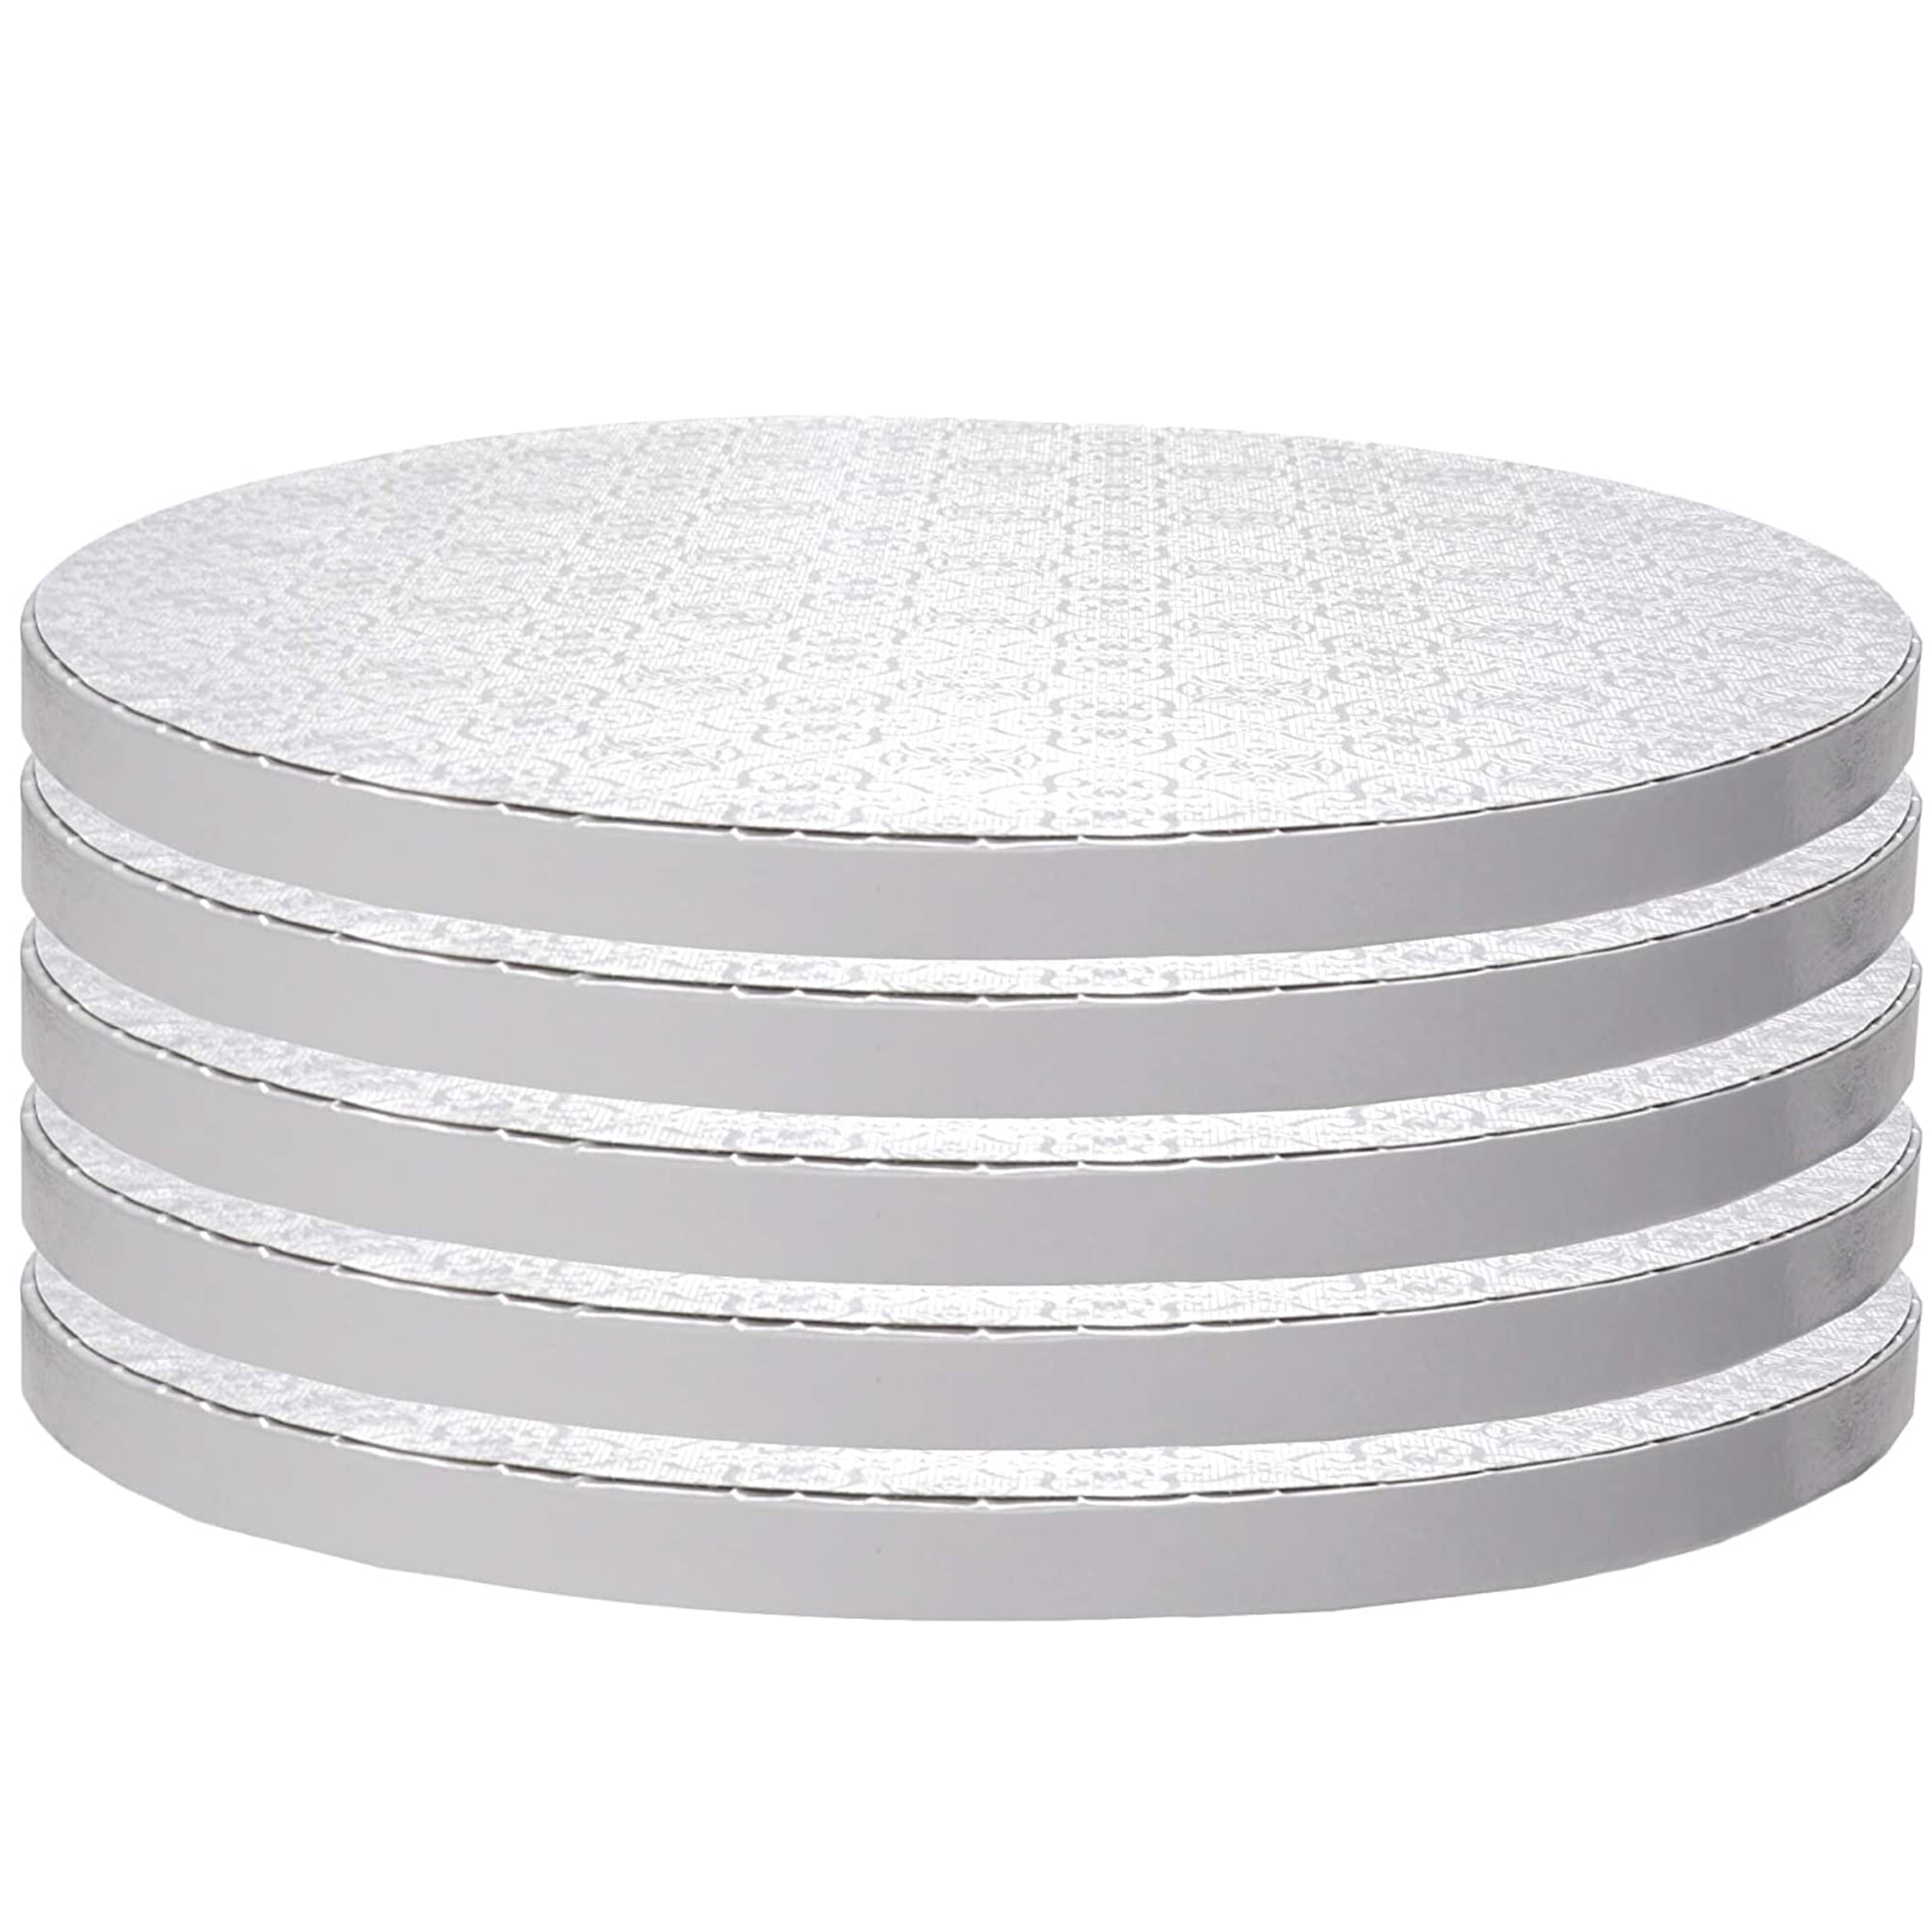 Spec101 Round Cake Drums 12pk White Cake Drum Boards with 1/2-Inch Thick Wrapped-Edges 12 Inch